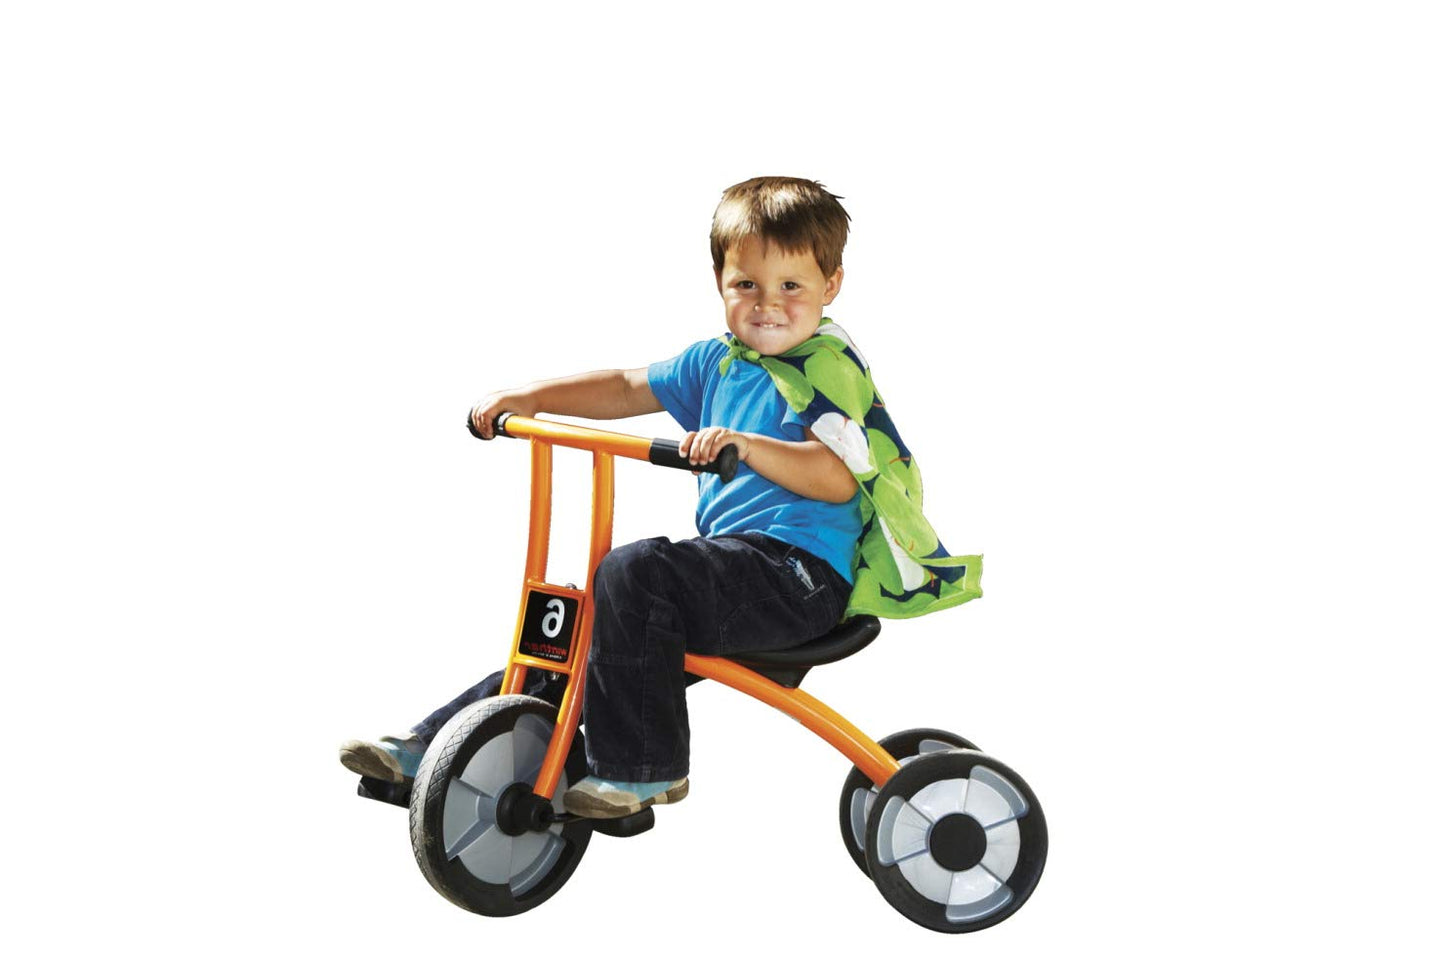 '- 1398980 Tricycle, 12 Inches Seat Height, Orange